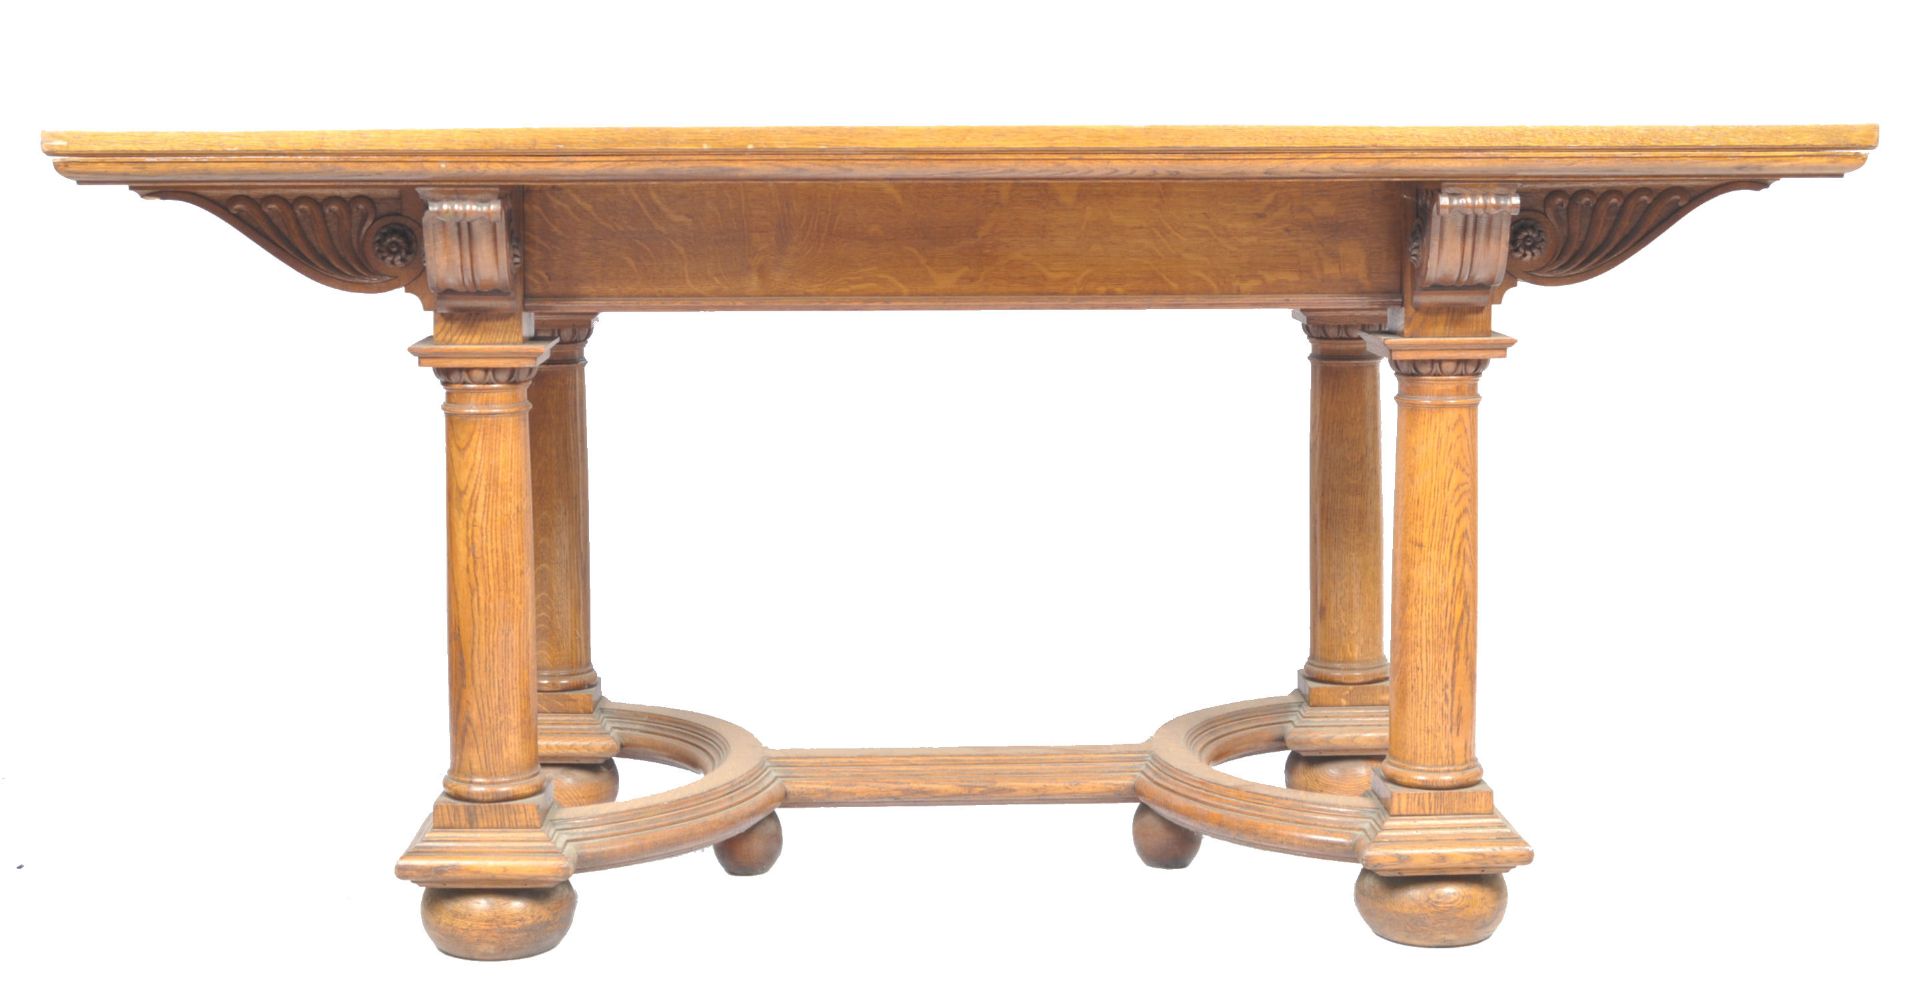 STUNNING 19TH CENTURY GOTHIC OAK DINING TABLE